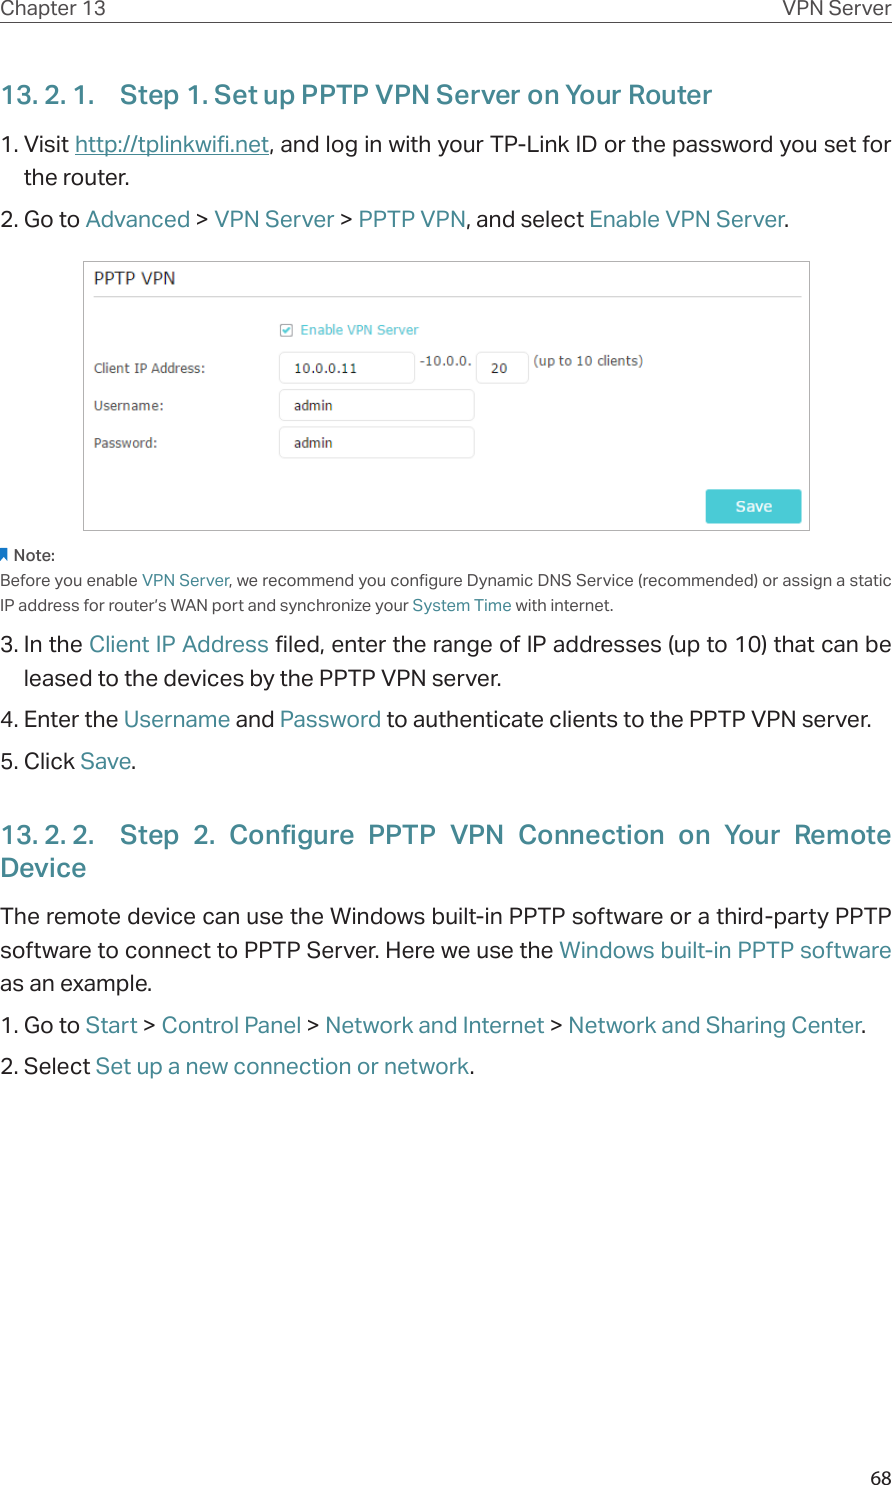 68Chapter 13 VPN Server13. 2. 1.  Step 1. Set up PPTP VPN Server on Your Router1. Visit http://tplinkwifi.net, and log in with your TP-Link ID or the password you set for the router.2. Go to Advanced &gt; VPN Server &gt; PPTP VPN, and select Enable VPN Server.Note:Before you enable VPN Server, we recommend you configure Dynamic DNS Service (recommended) or assign a static IP address for router’s WAN port and synchronize your System Time with internet.3. In the Client IP Address filed, enter the range of IP addresses (up to 10) that can be leased to the devices by the PPTP VPN server.4. Enter the Username and Password to authenticate clients to the PPTP VPN server.5. Click Save.13. 2. 2.  Step 2. Configure PPTP VPN Connection on Your Remote DeviceThe remote device can use the Windows built-in PPTP software or a third-party PPTP software to connect to PPTP Server. Here we use the Windows built-in PPTP software as an example.1. Go to Start &gt; Control Panel &gt; Network and Internet &gt; Network and Sharing Center.2. Select Set up a new connection or network.